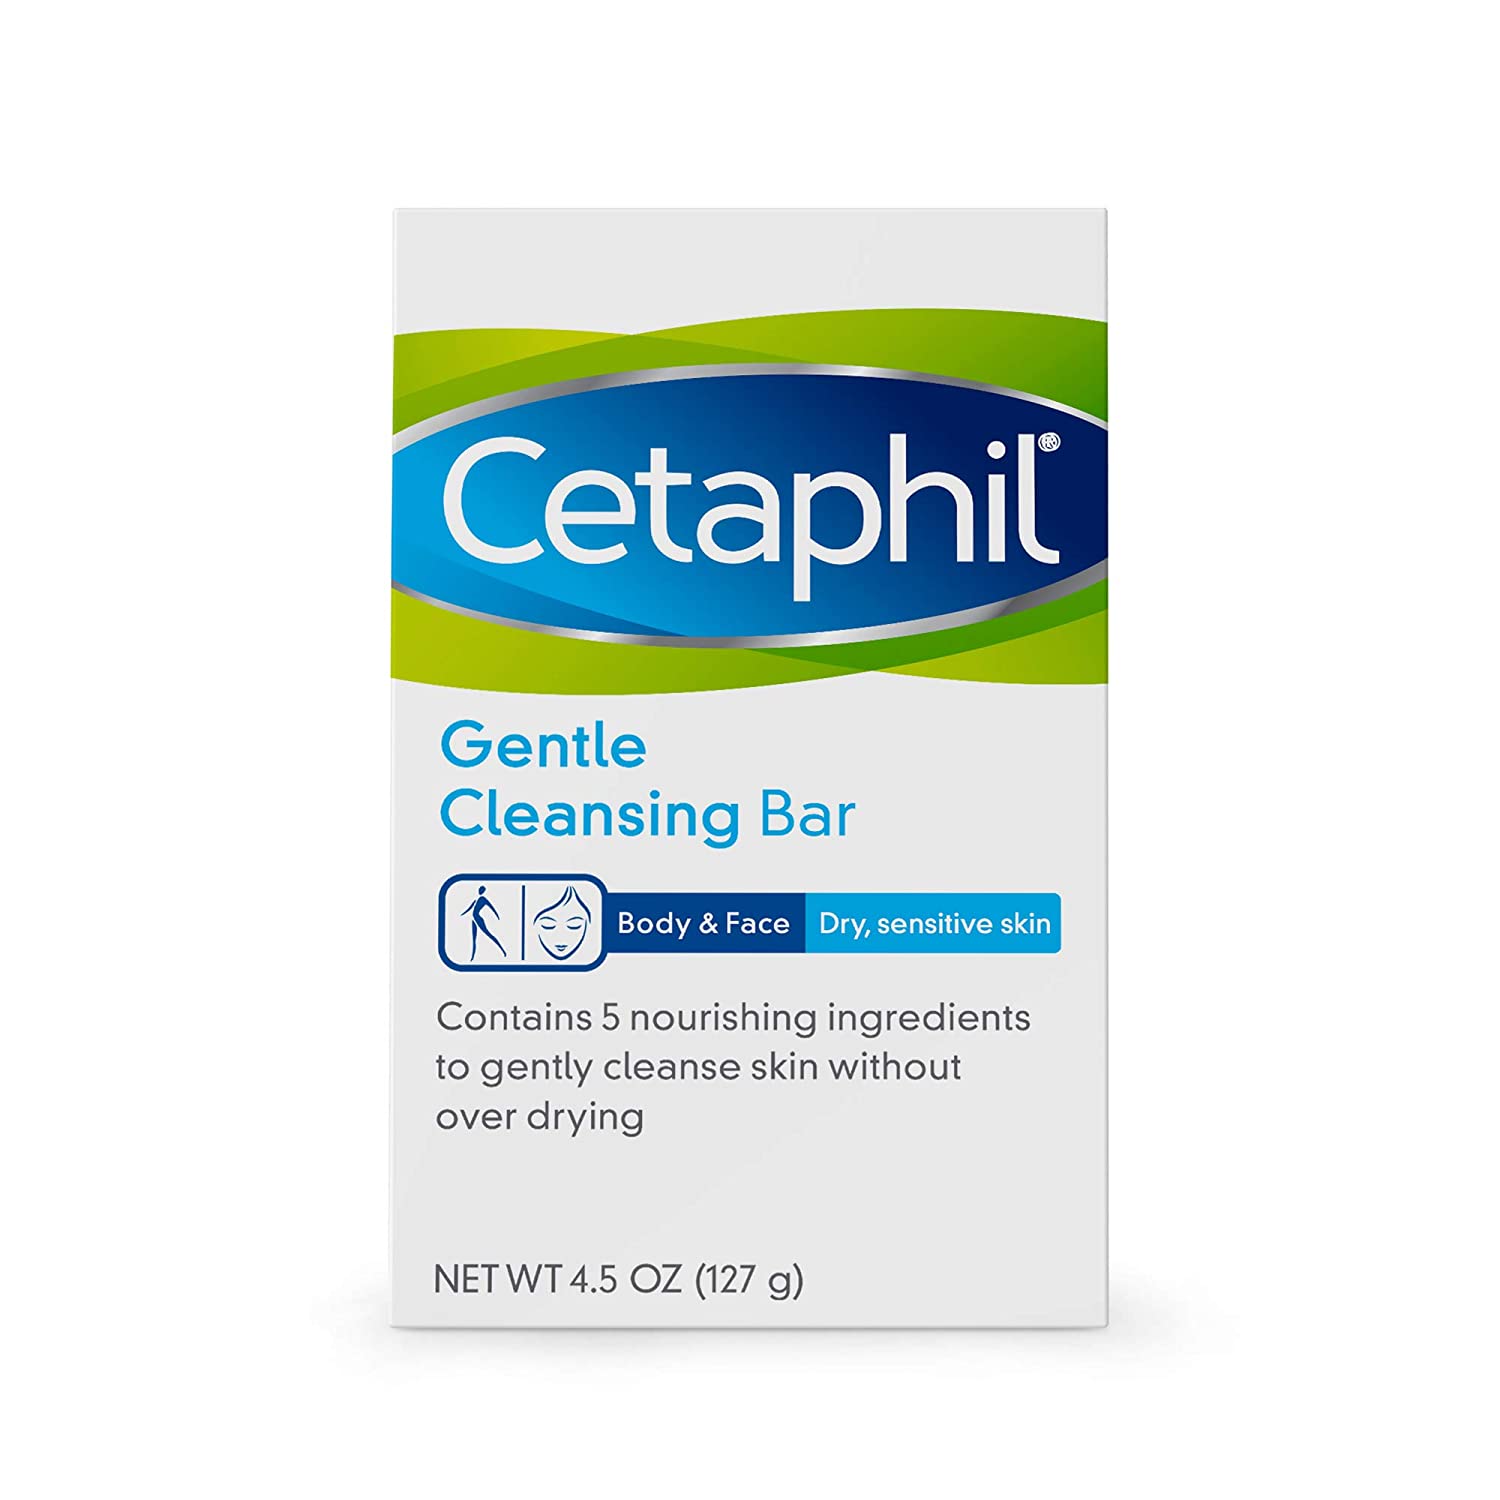 Cetaphil Gentle Cleansing Bar for Dry and Sensitive Skin - 4.5 oz (Pack of 6)